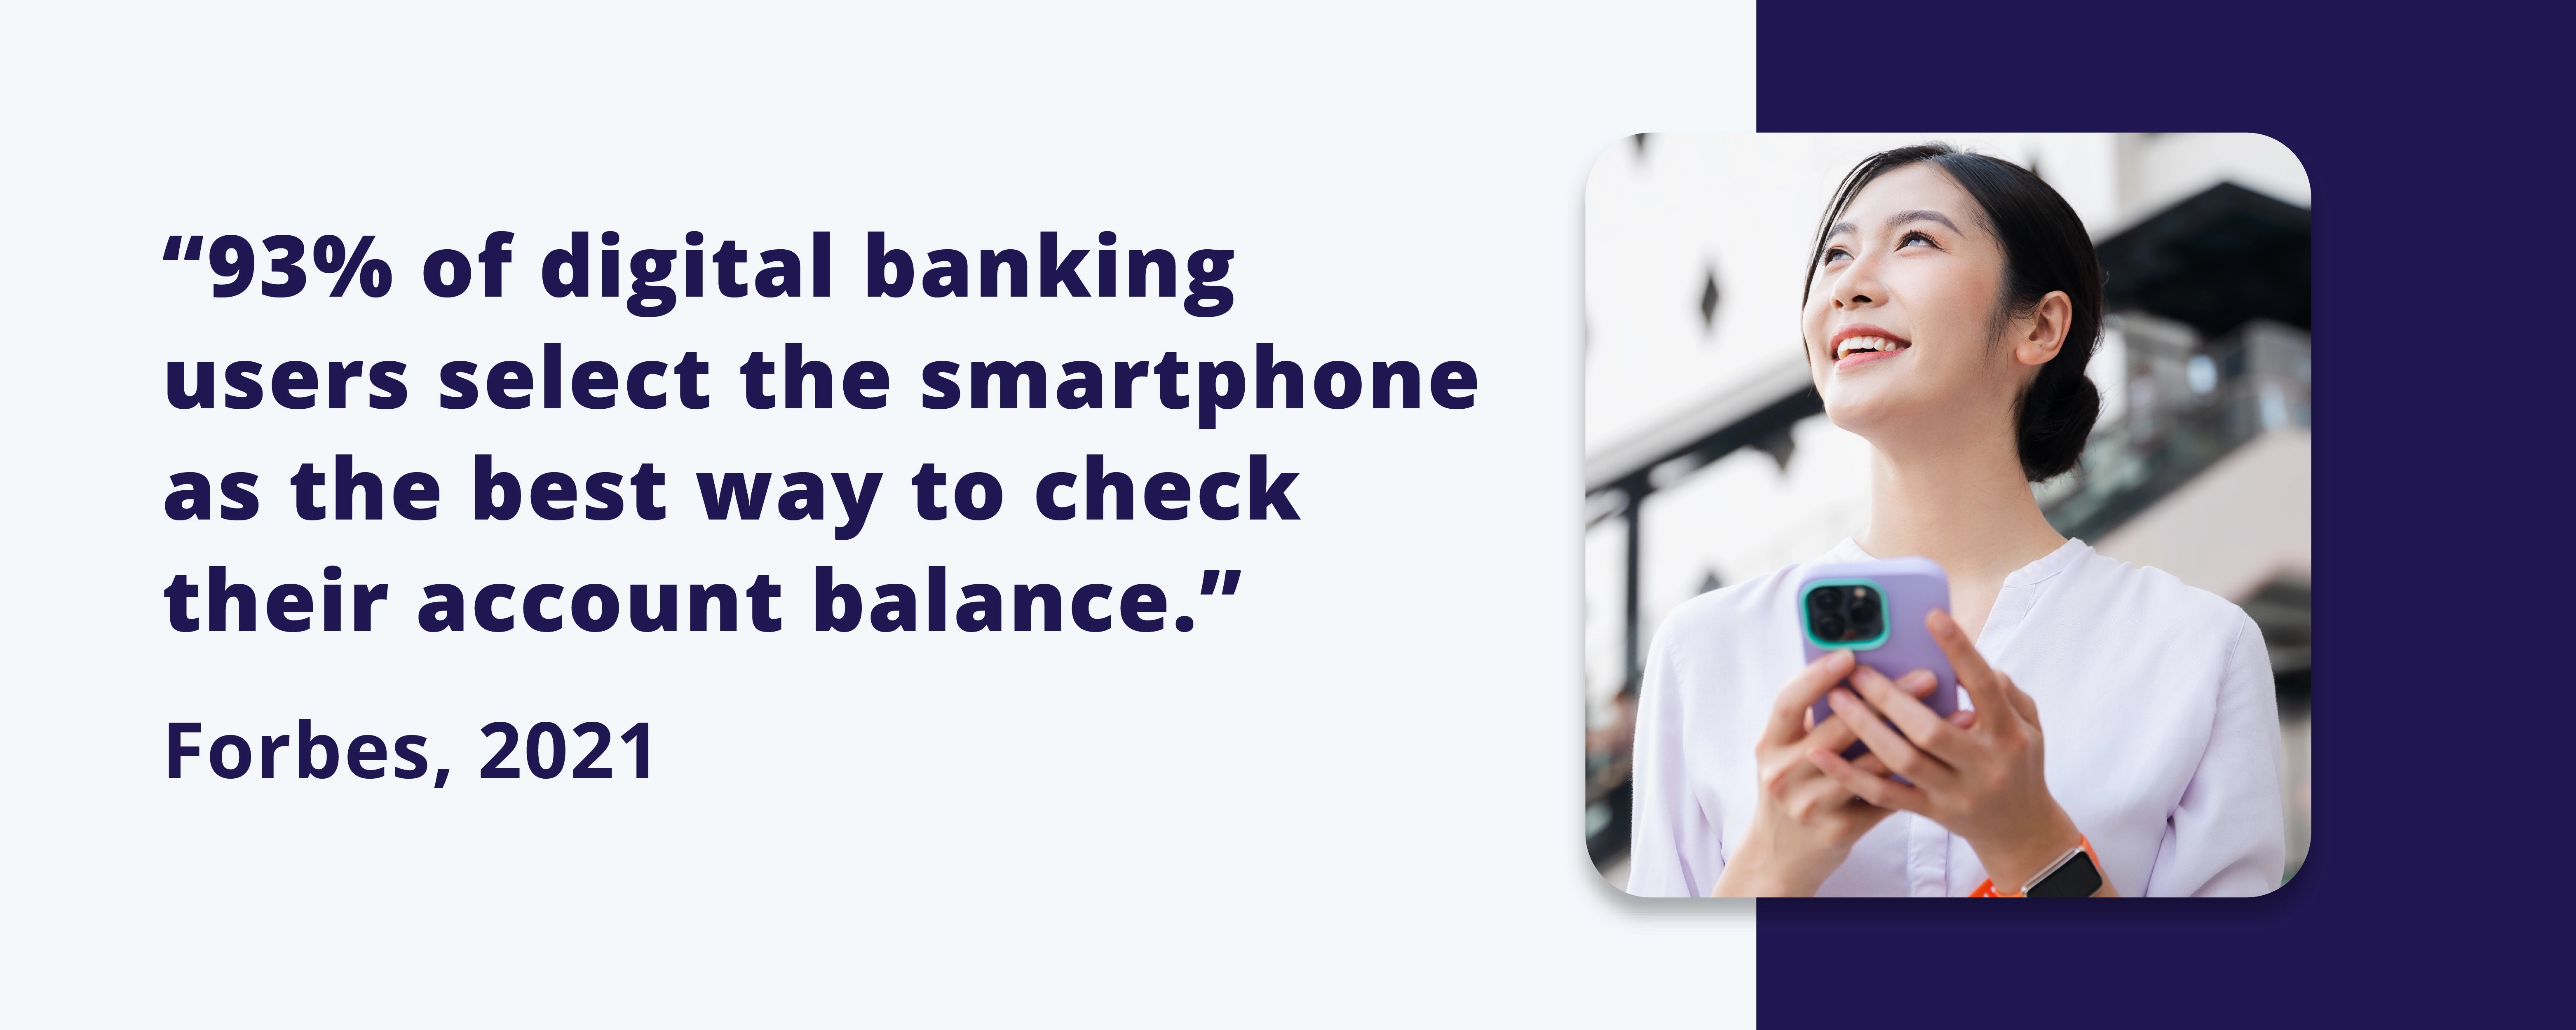 Why Millennials Prefer Mobile Banking Over Traditional Banking